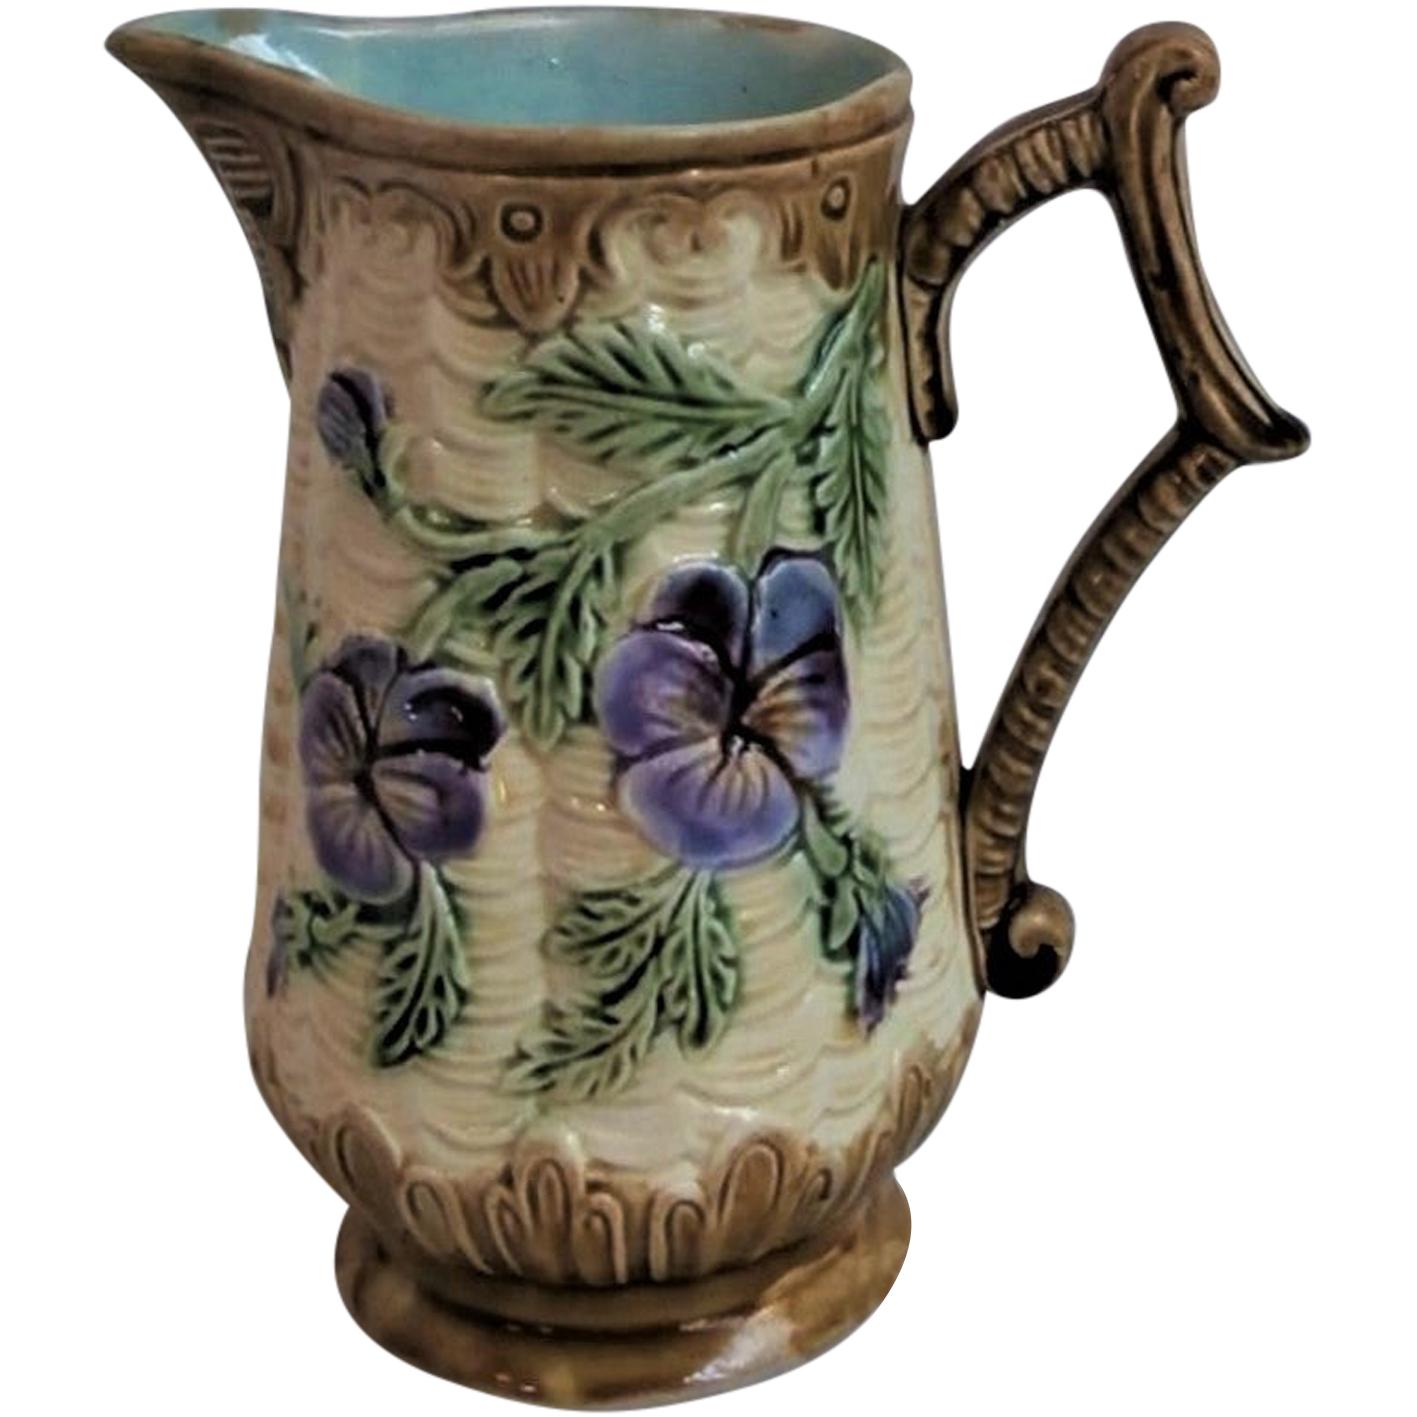 English Majolica pitcher with flowers, circa 1890
Measures: H 6